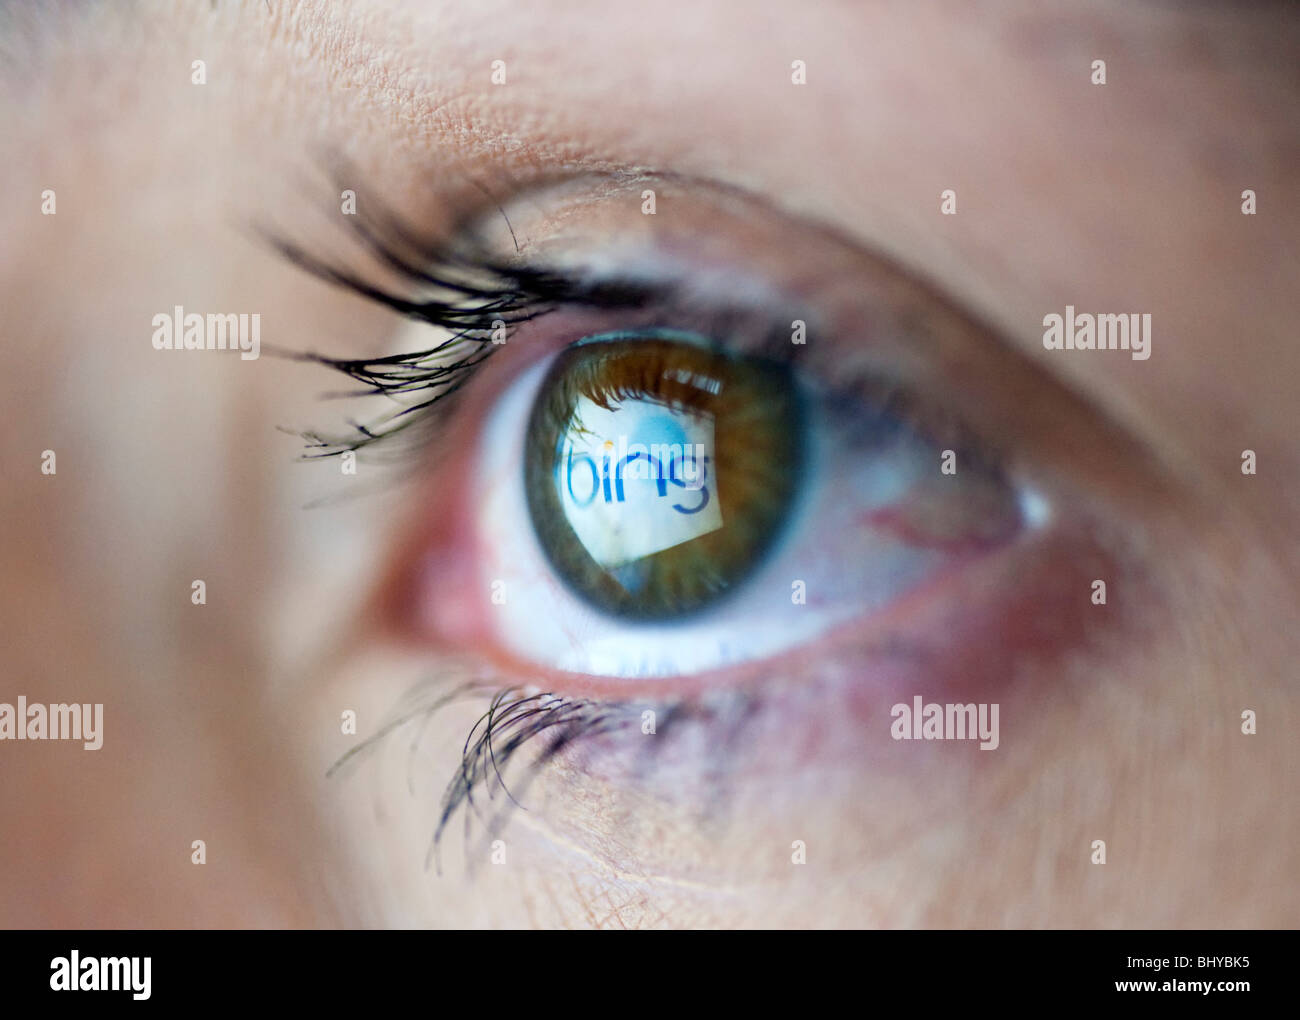 Google eyes hi-res stock photography and images - Alamy